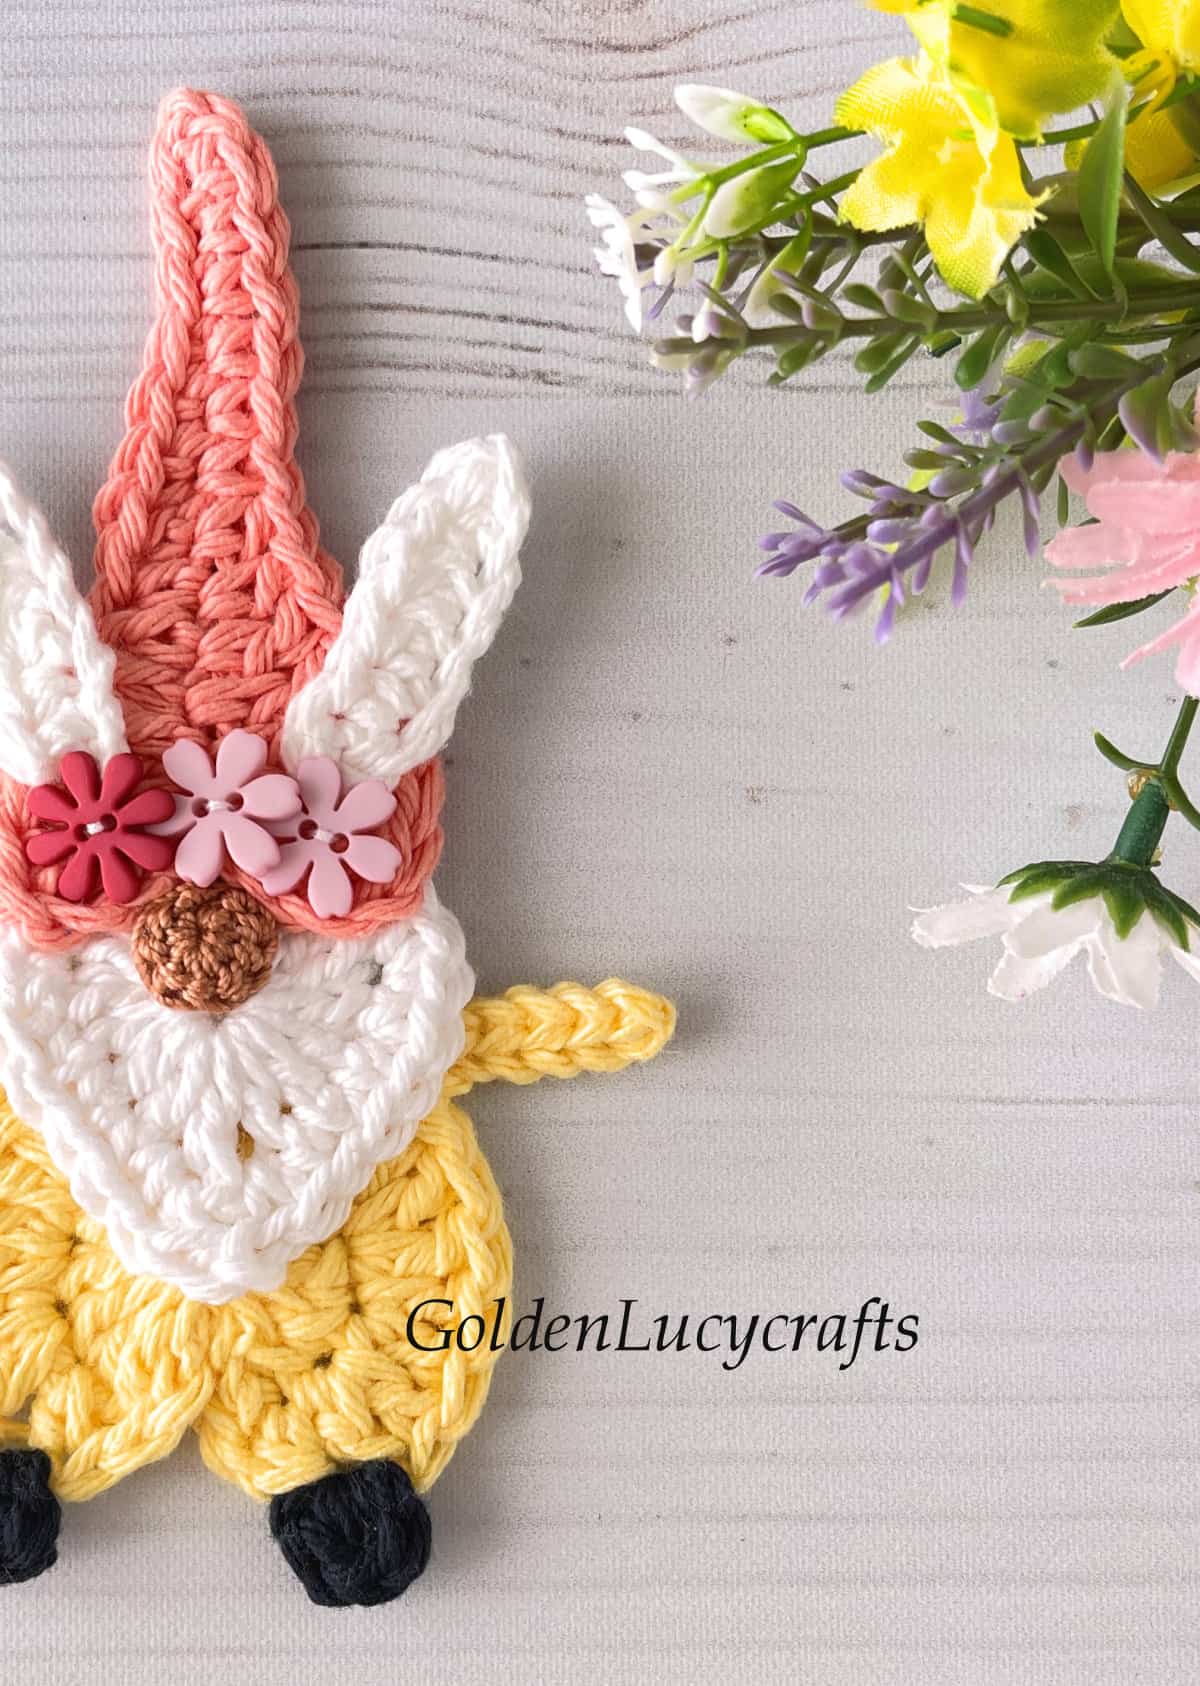 Crochet Easter gnome close up picture.